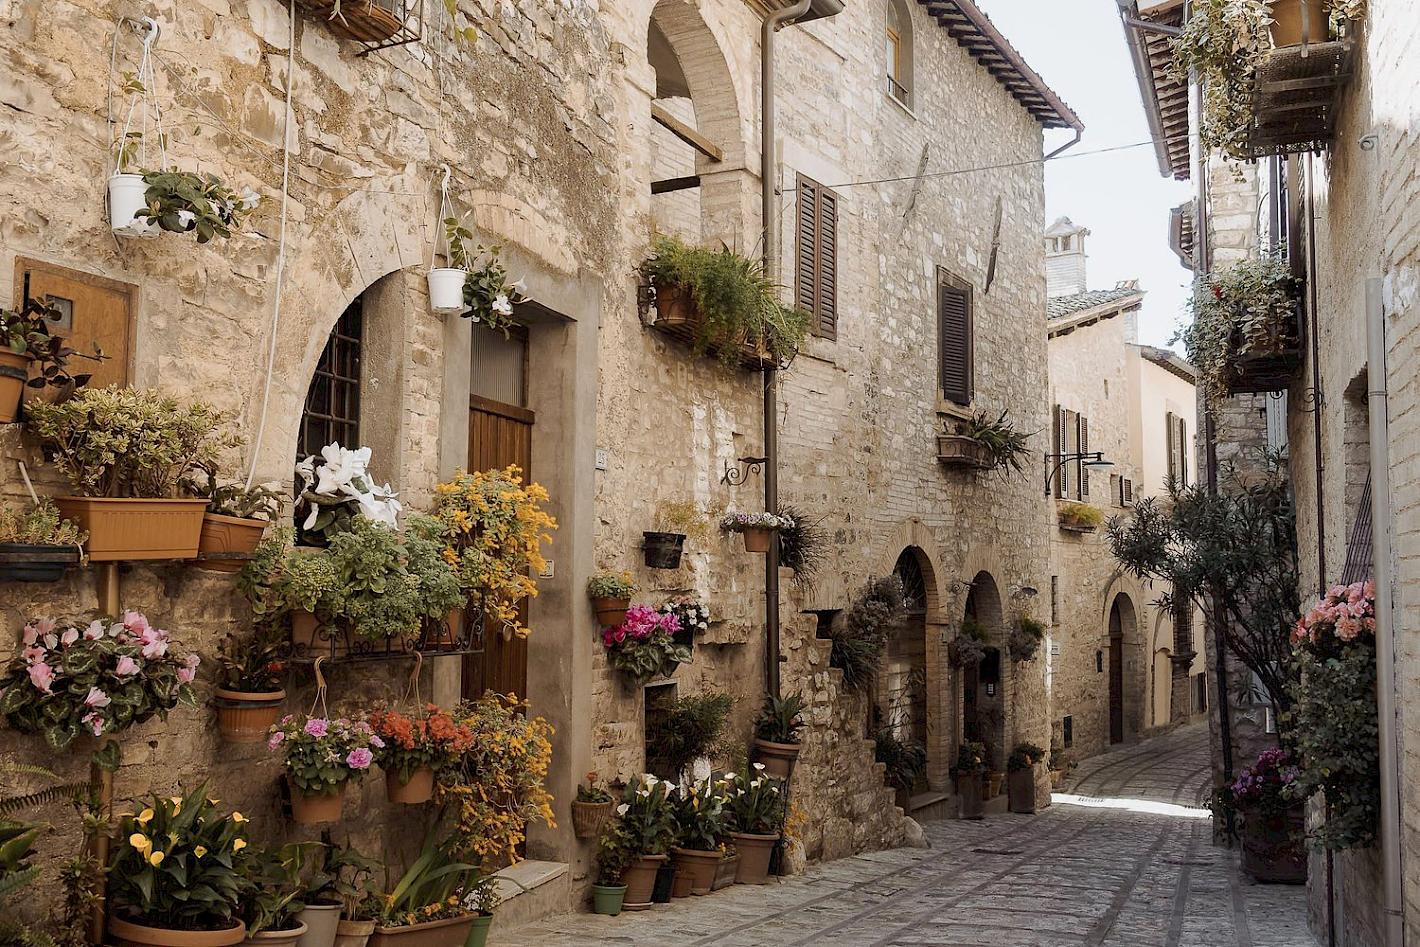 Spello on of the prettiest towns in Umbria